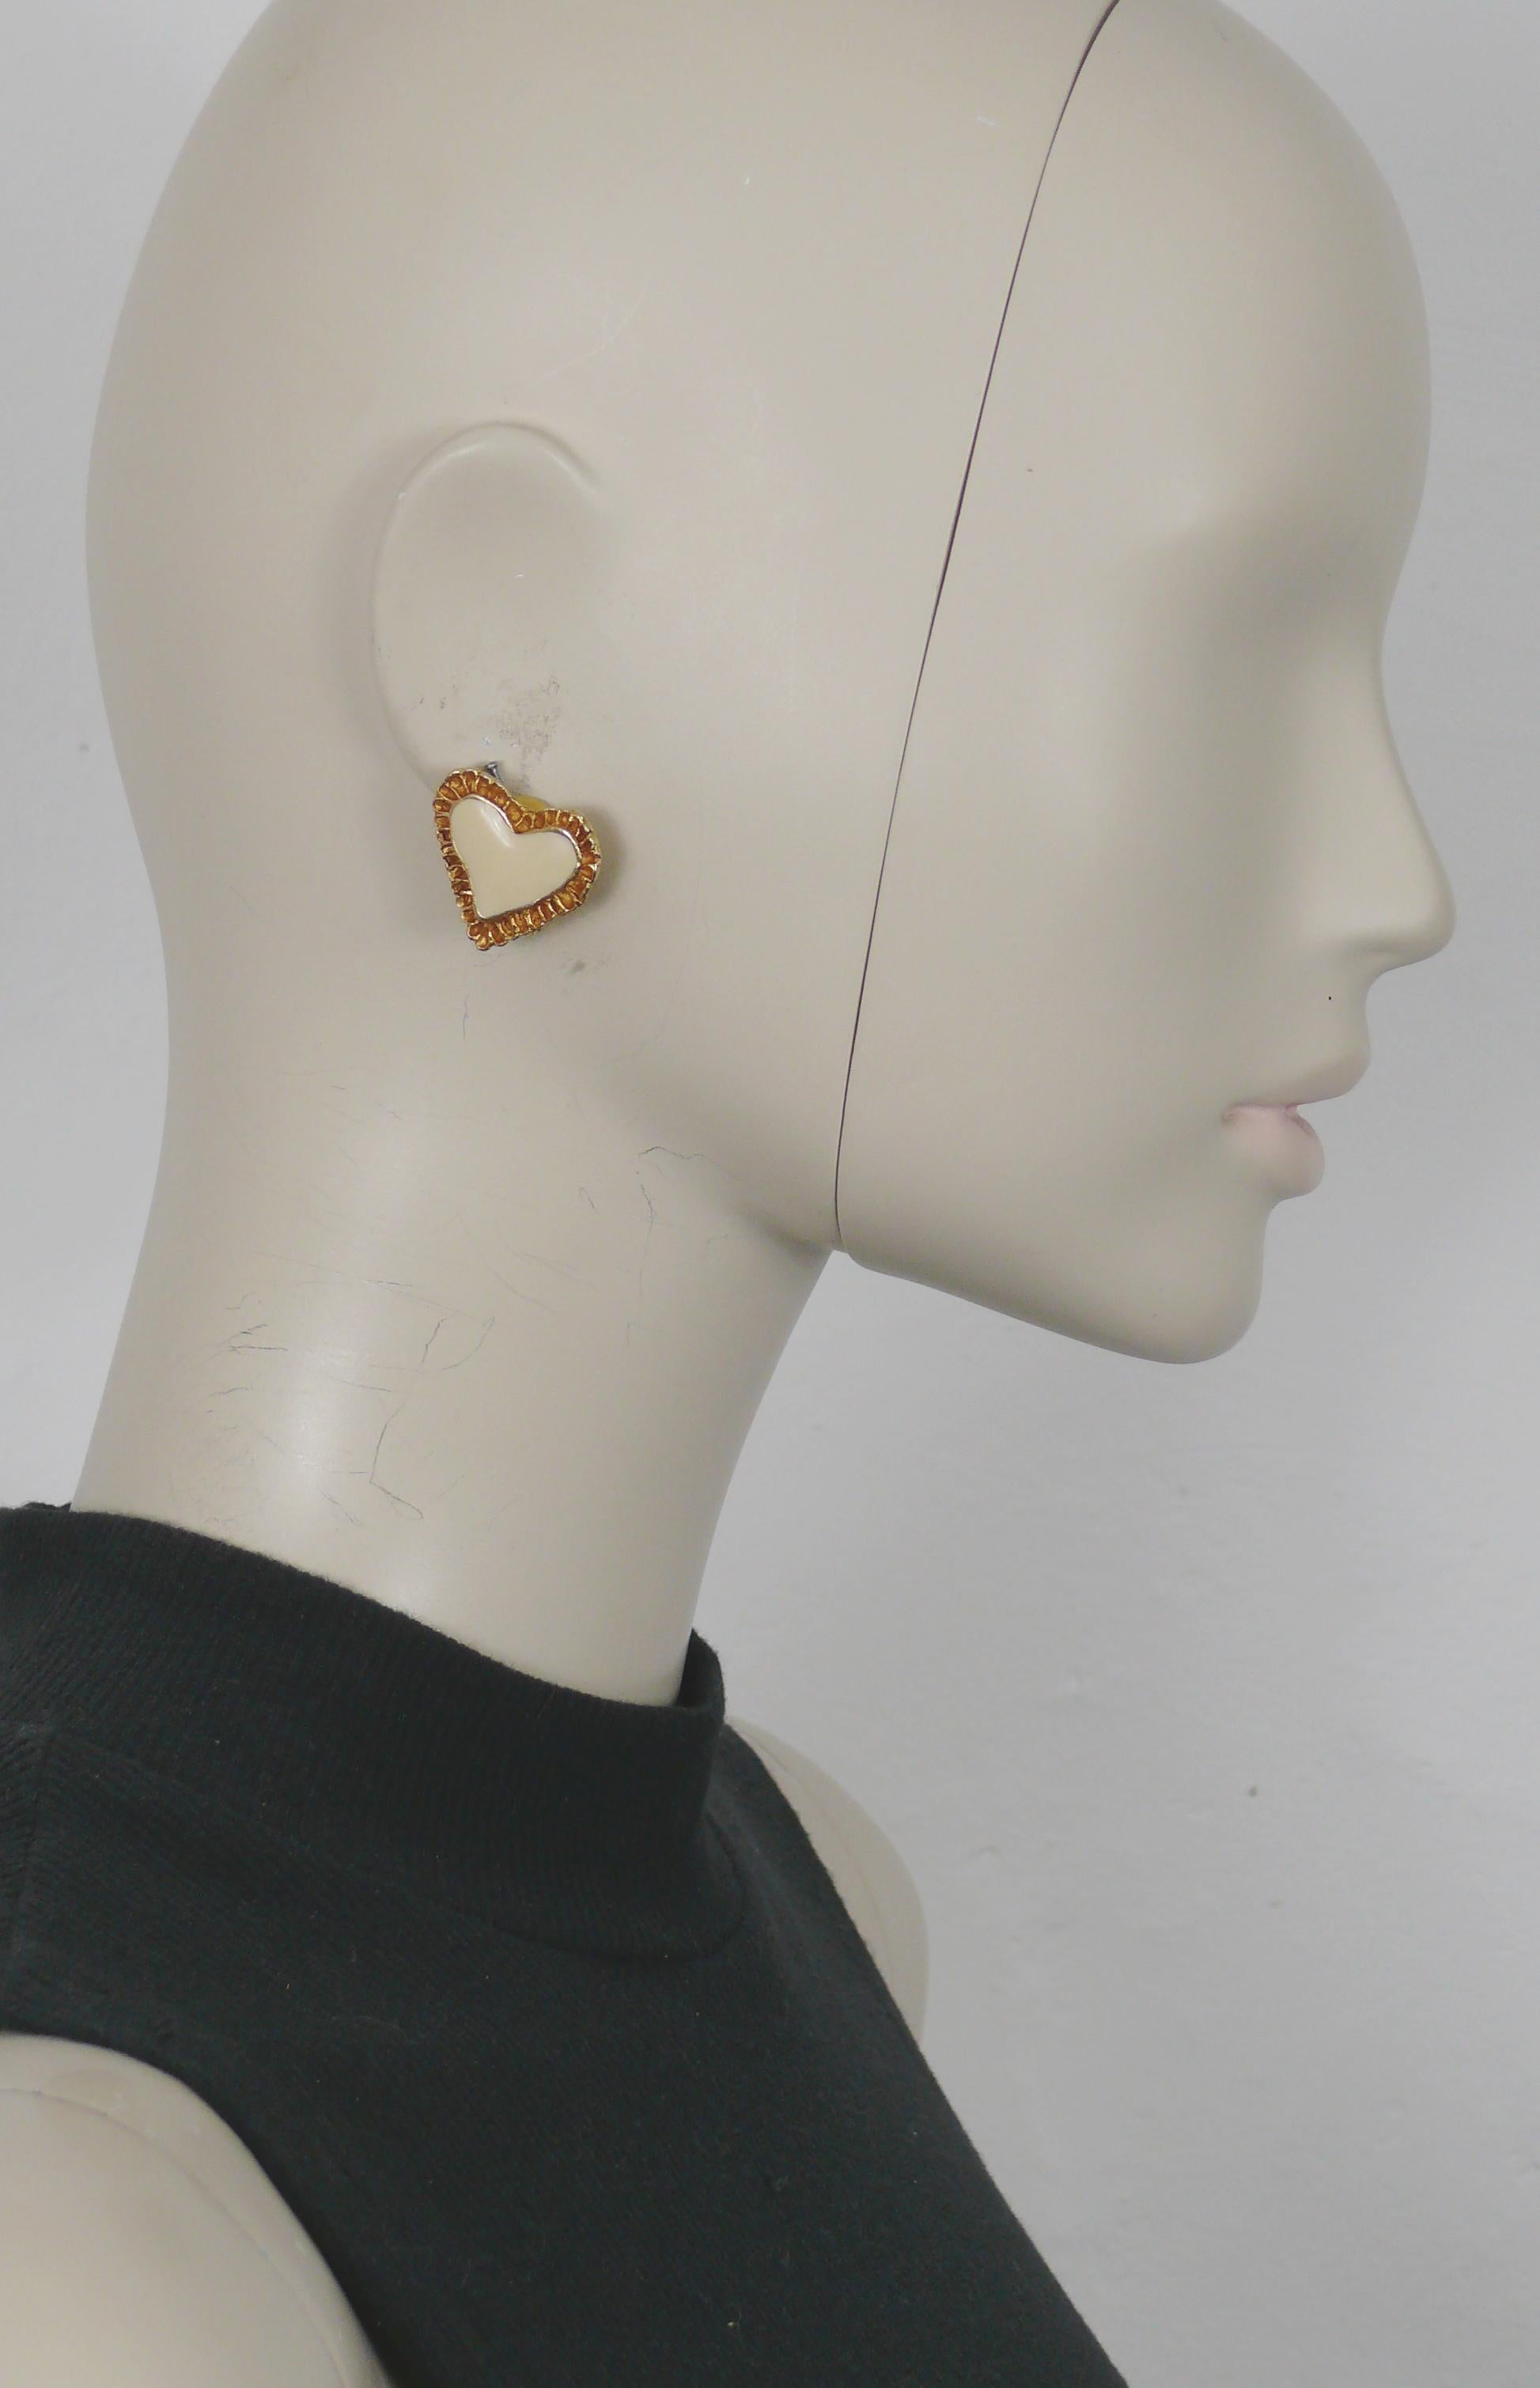 CHRISTIAN LACROIX vintage gold toned textured heart clip-on earrings embellished with off-white enamel.

Marked CHRISTIAN LACROIX E94 Made in France.

Indicative measurements : height approx. 2.1 cm (0.83 inch) / max. width approx 2.5 cm (0.98